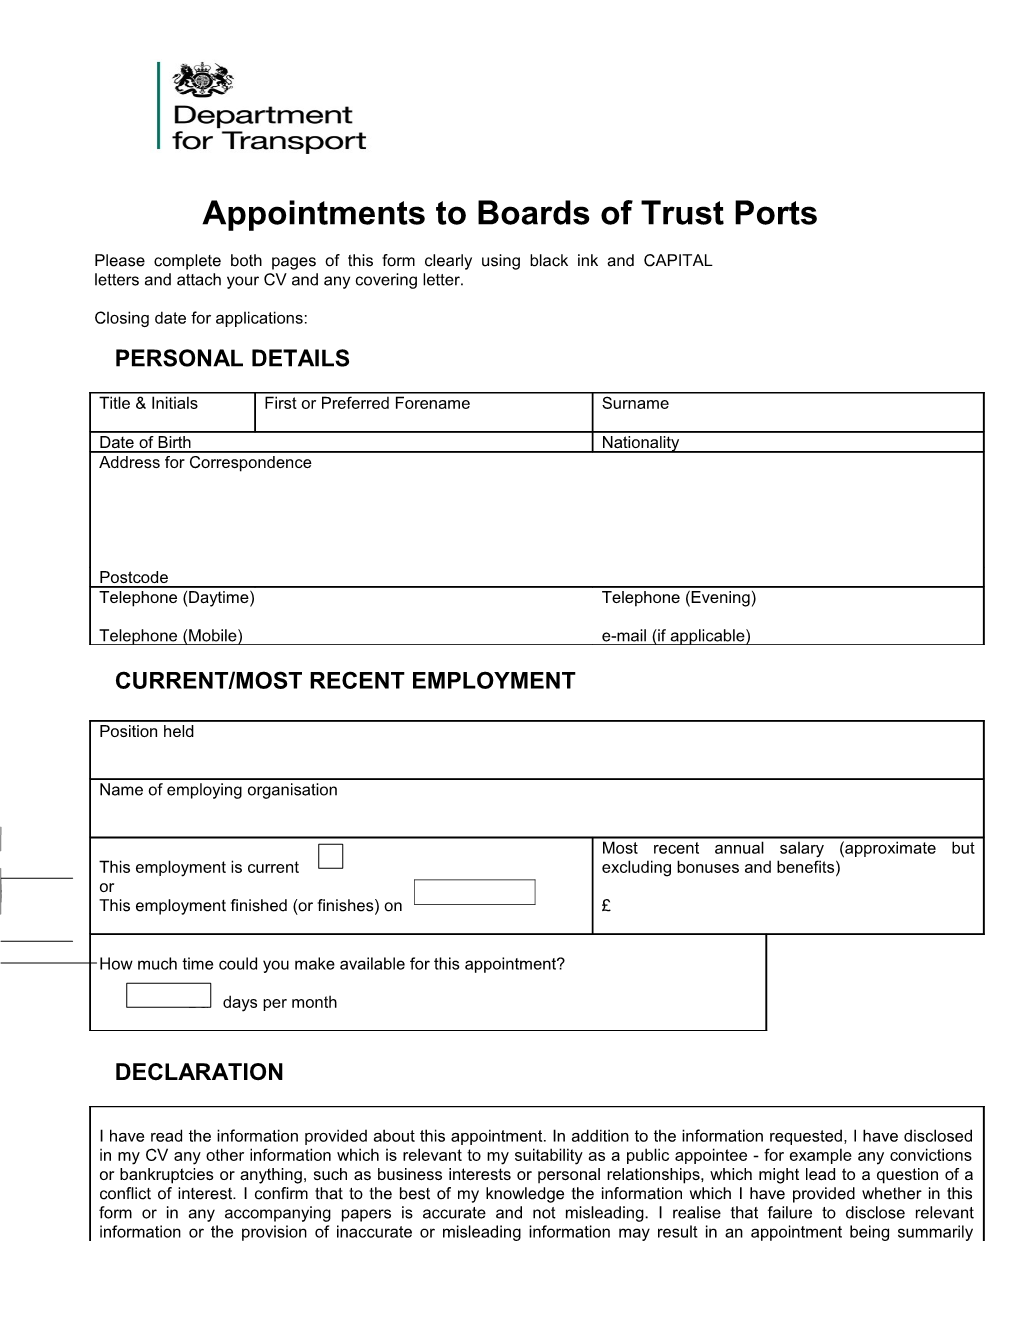 Appointments to Boards of Trust Ports